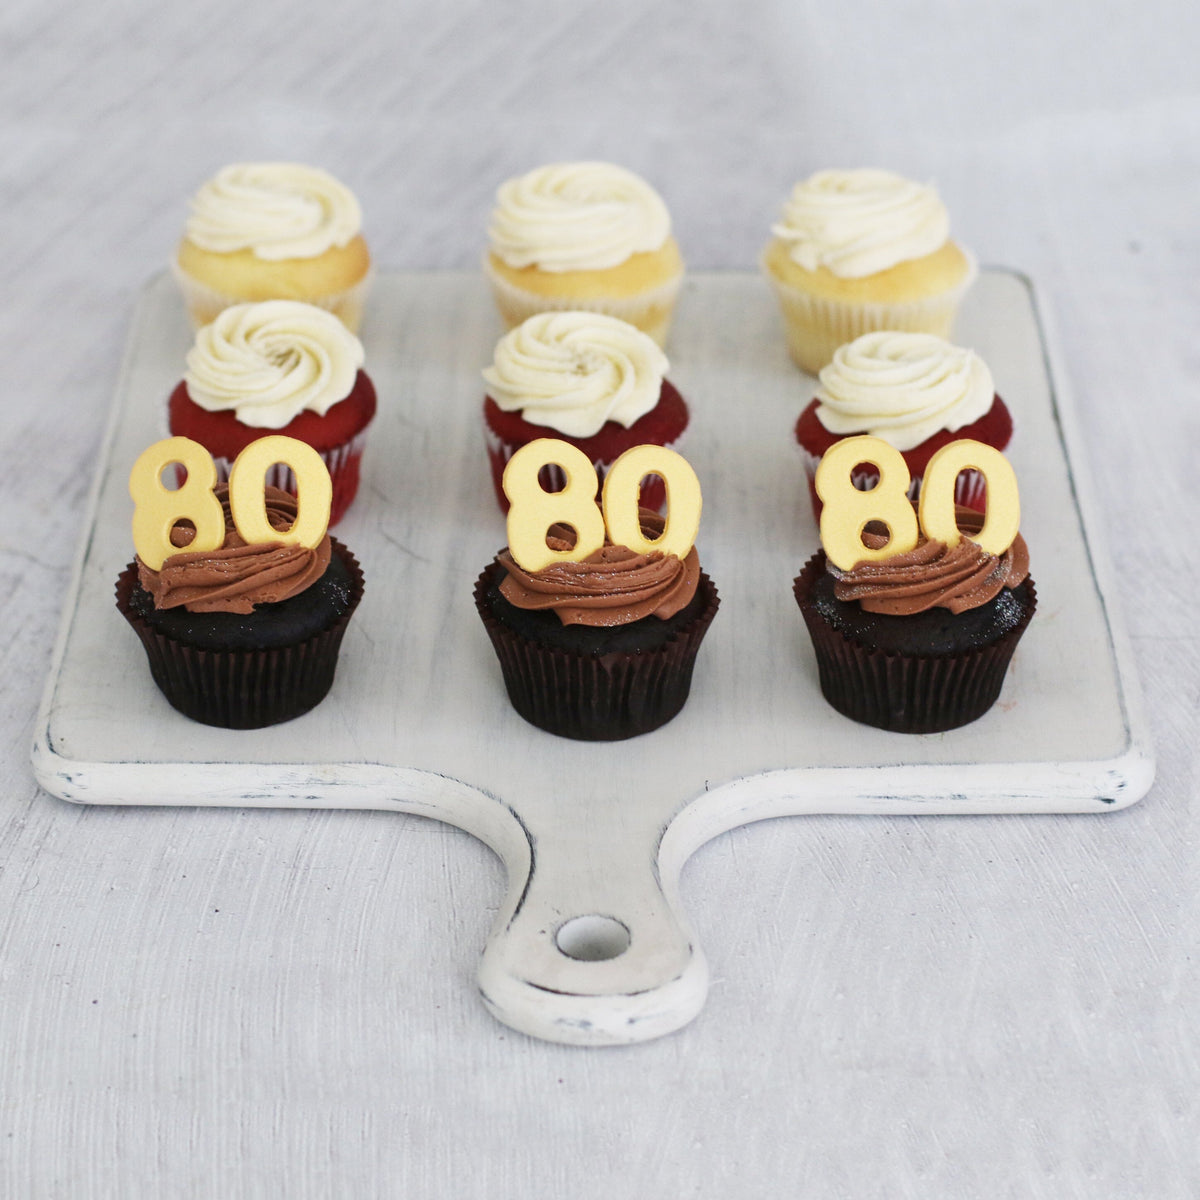 80th Birthday Cupcakes in GOLD Cupcakes The Cupcake Queens 